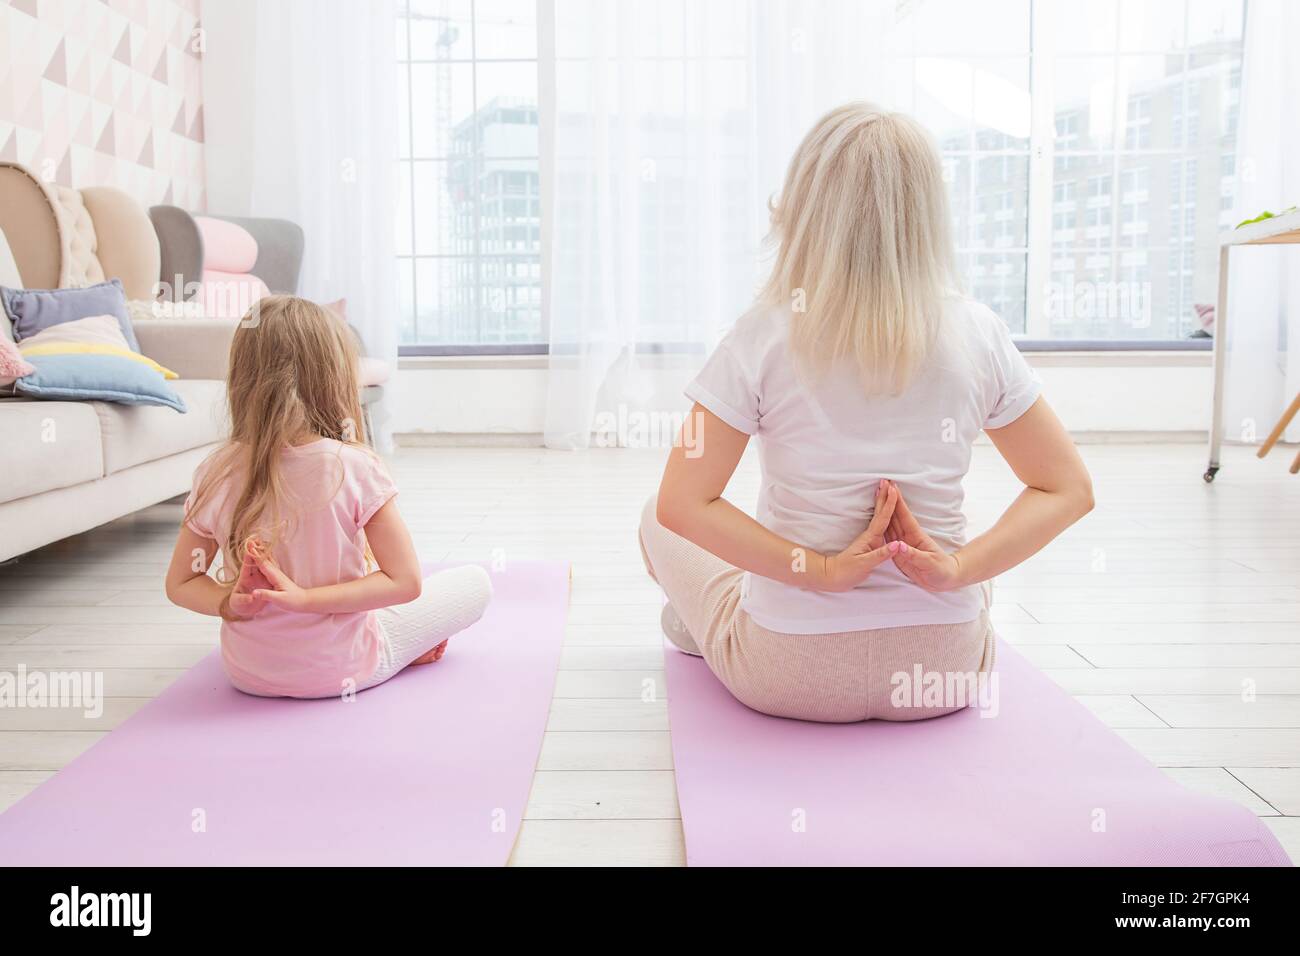 Full length back side view smiling blond mother on yoga mat with